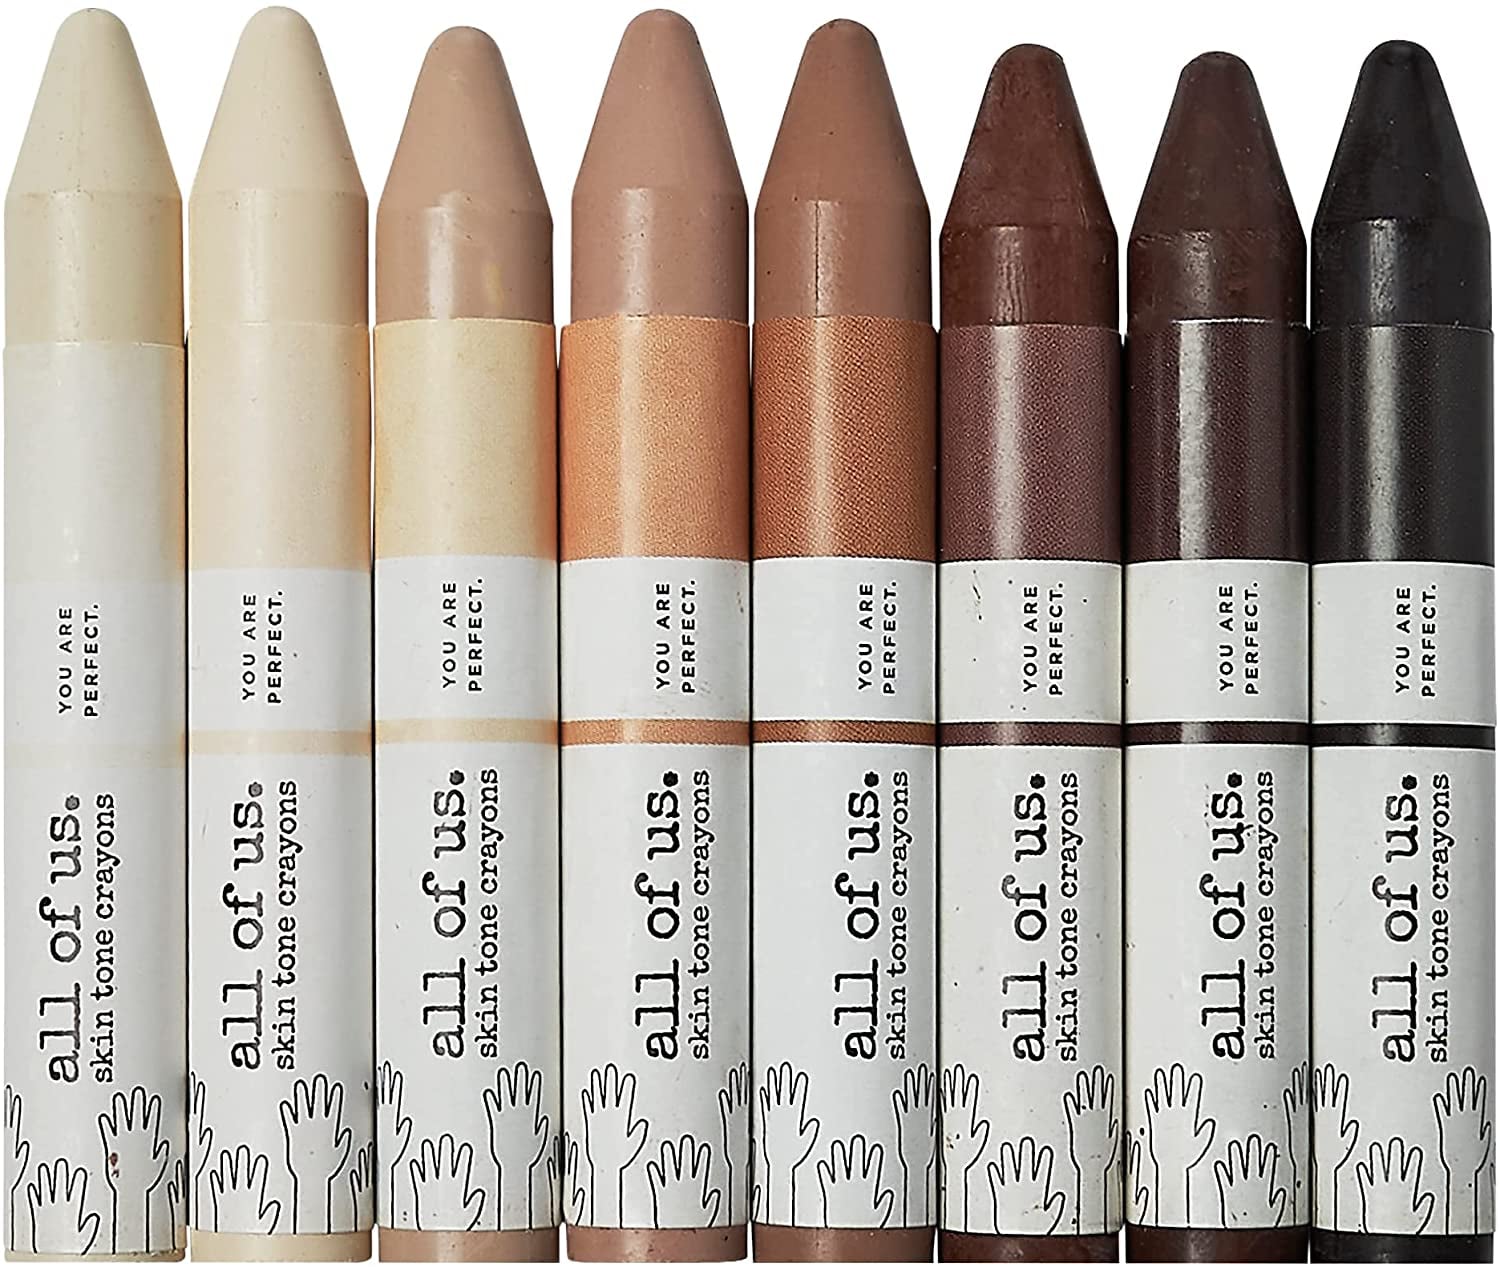 All of Us Beeswax Skin Tone Crayons